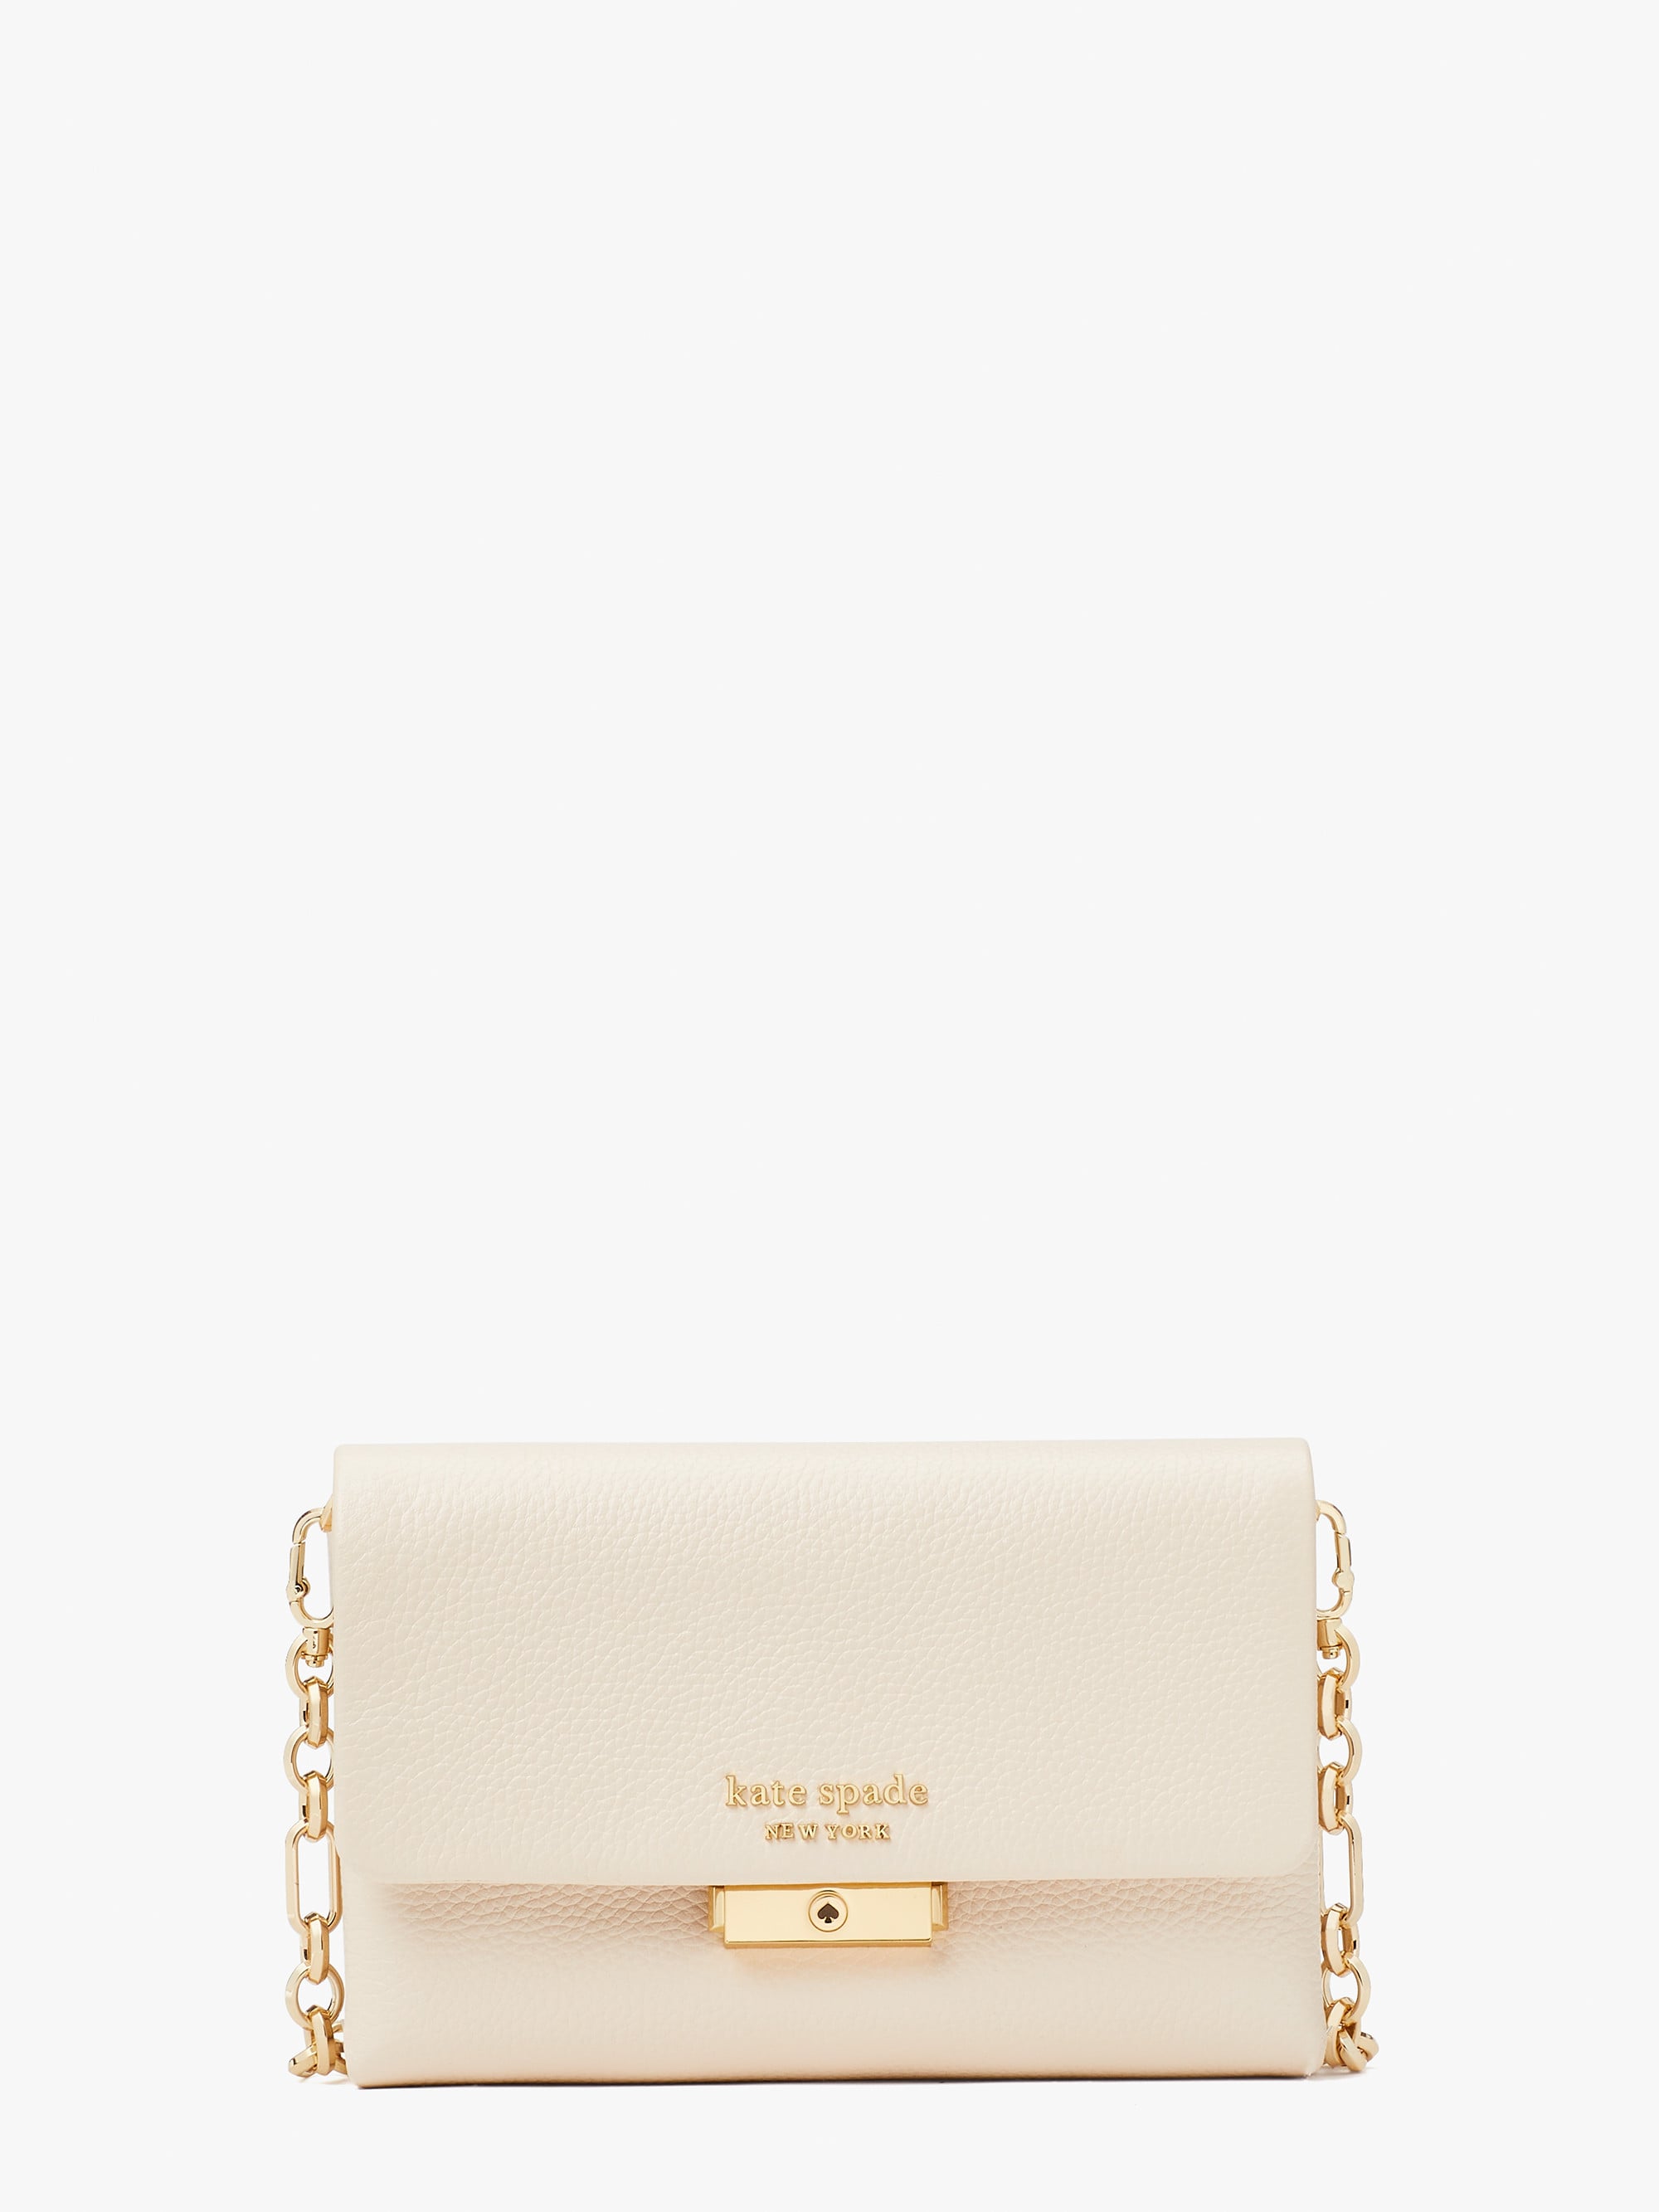 Kate Spade New York Launches The Knott Handbag For Spring 2021 A Modern  Classic With A Fashion Twist That Stands Out In A Crowd — SSI Life